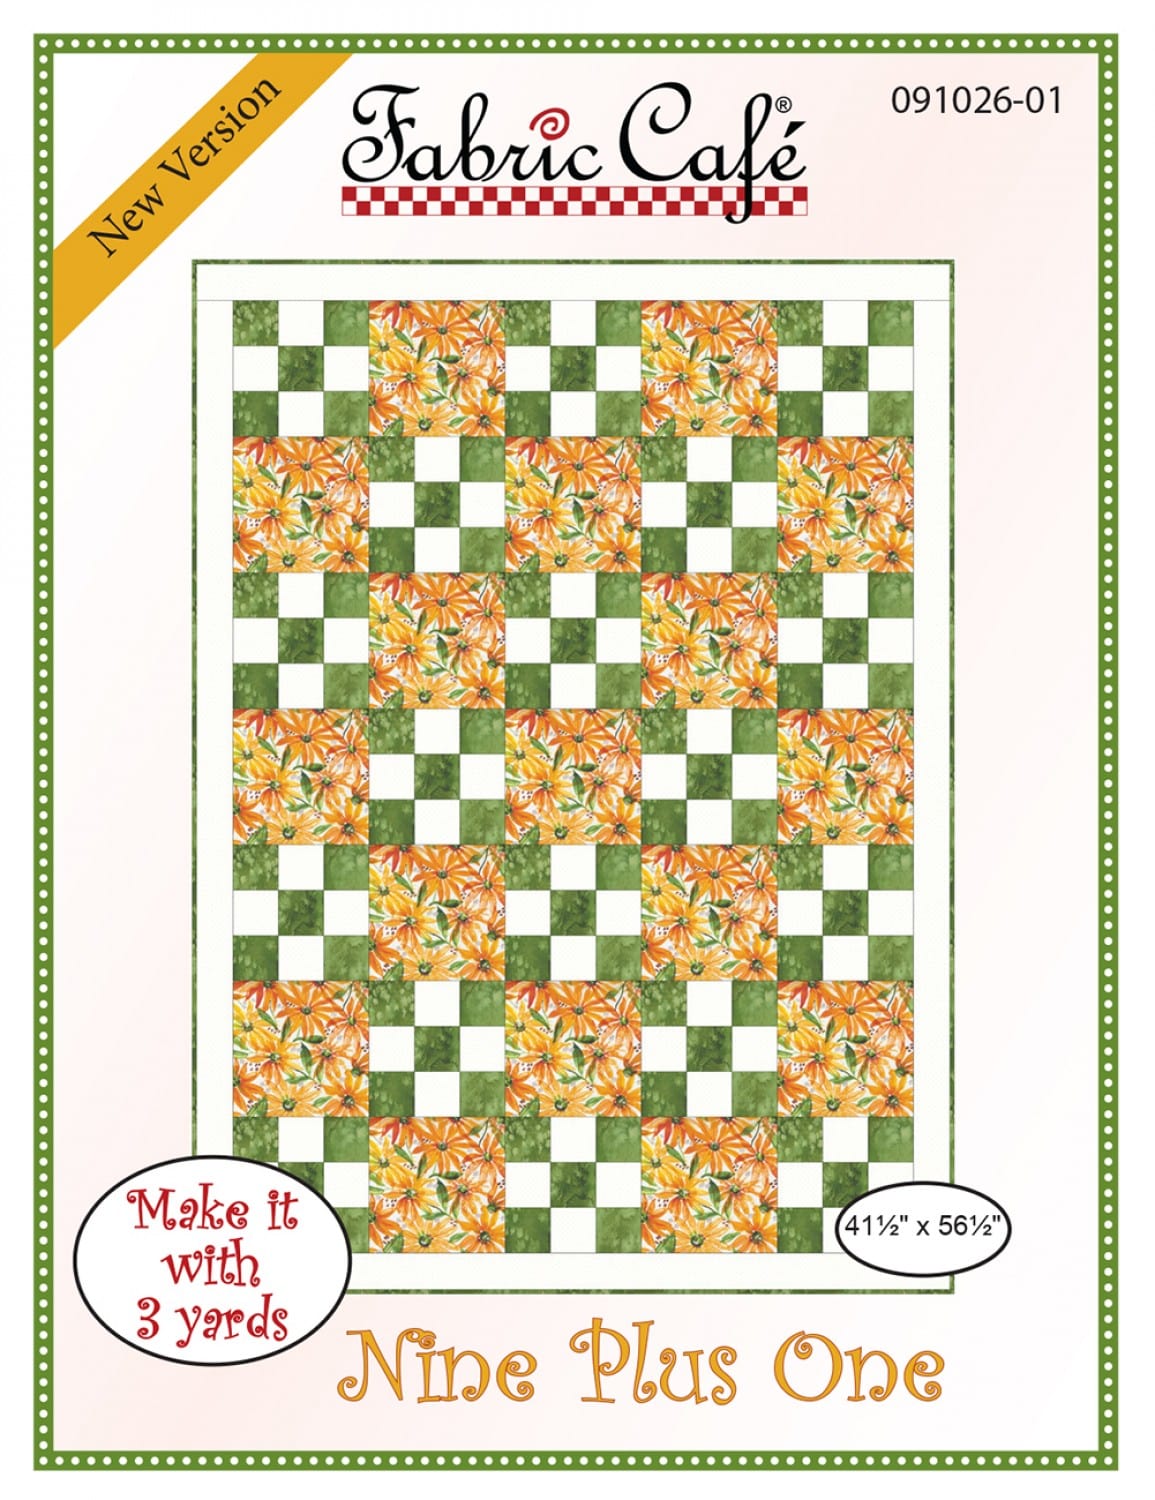 Nine Plus One Pattern - 3-yard Quilt - Fabric Cafe